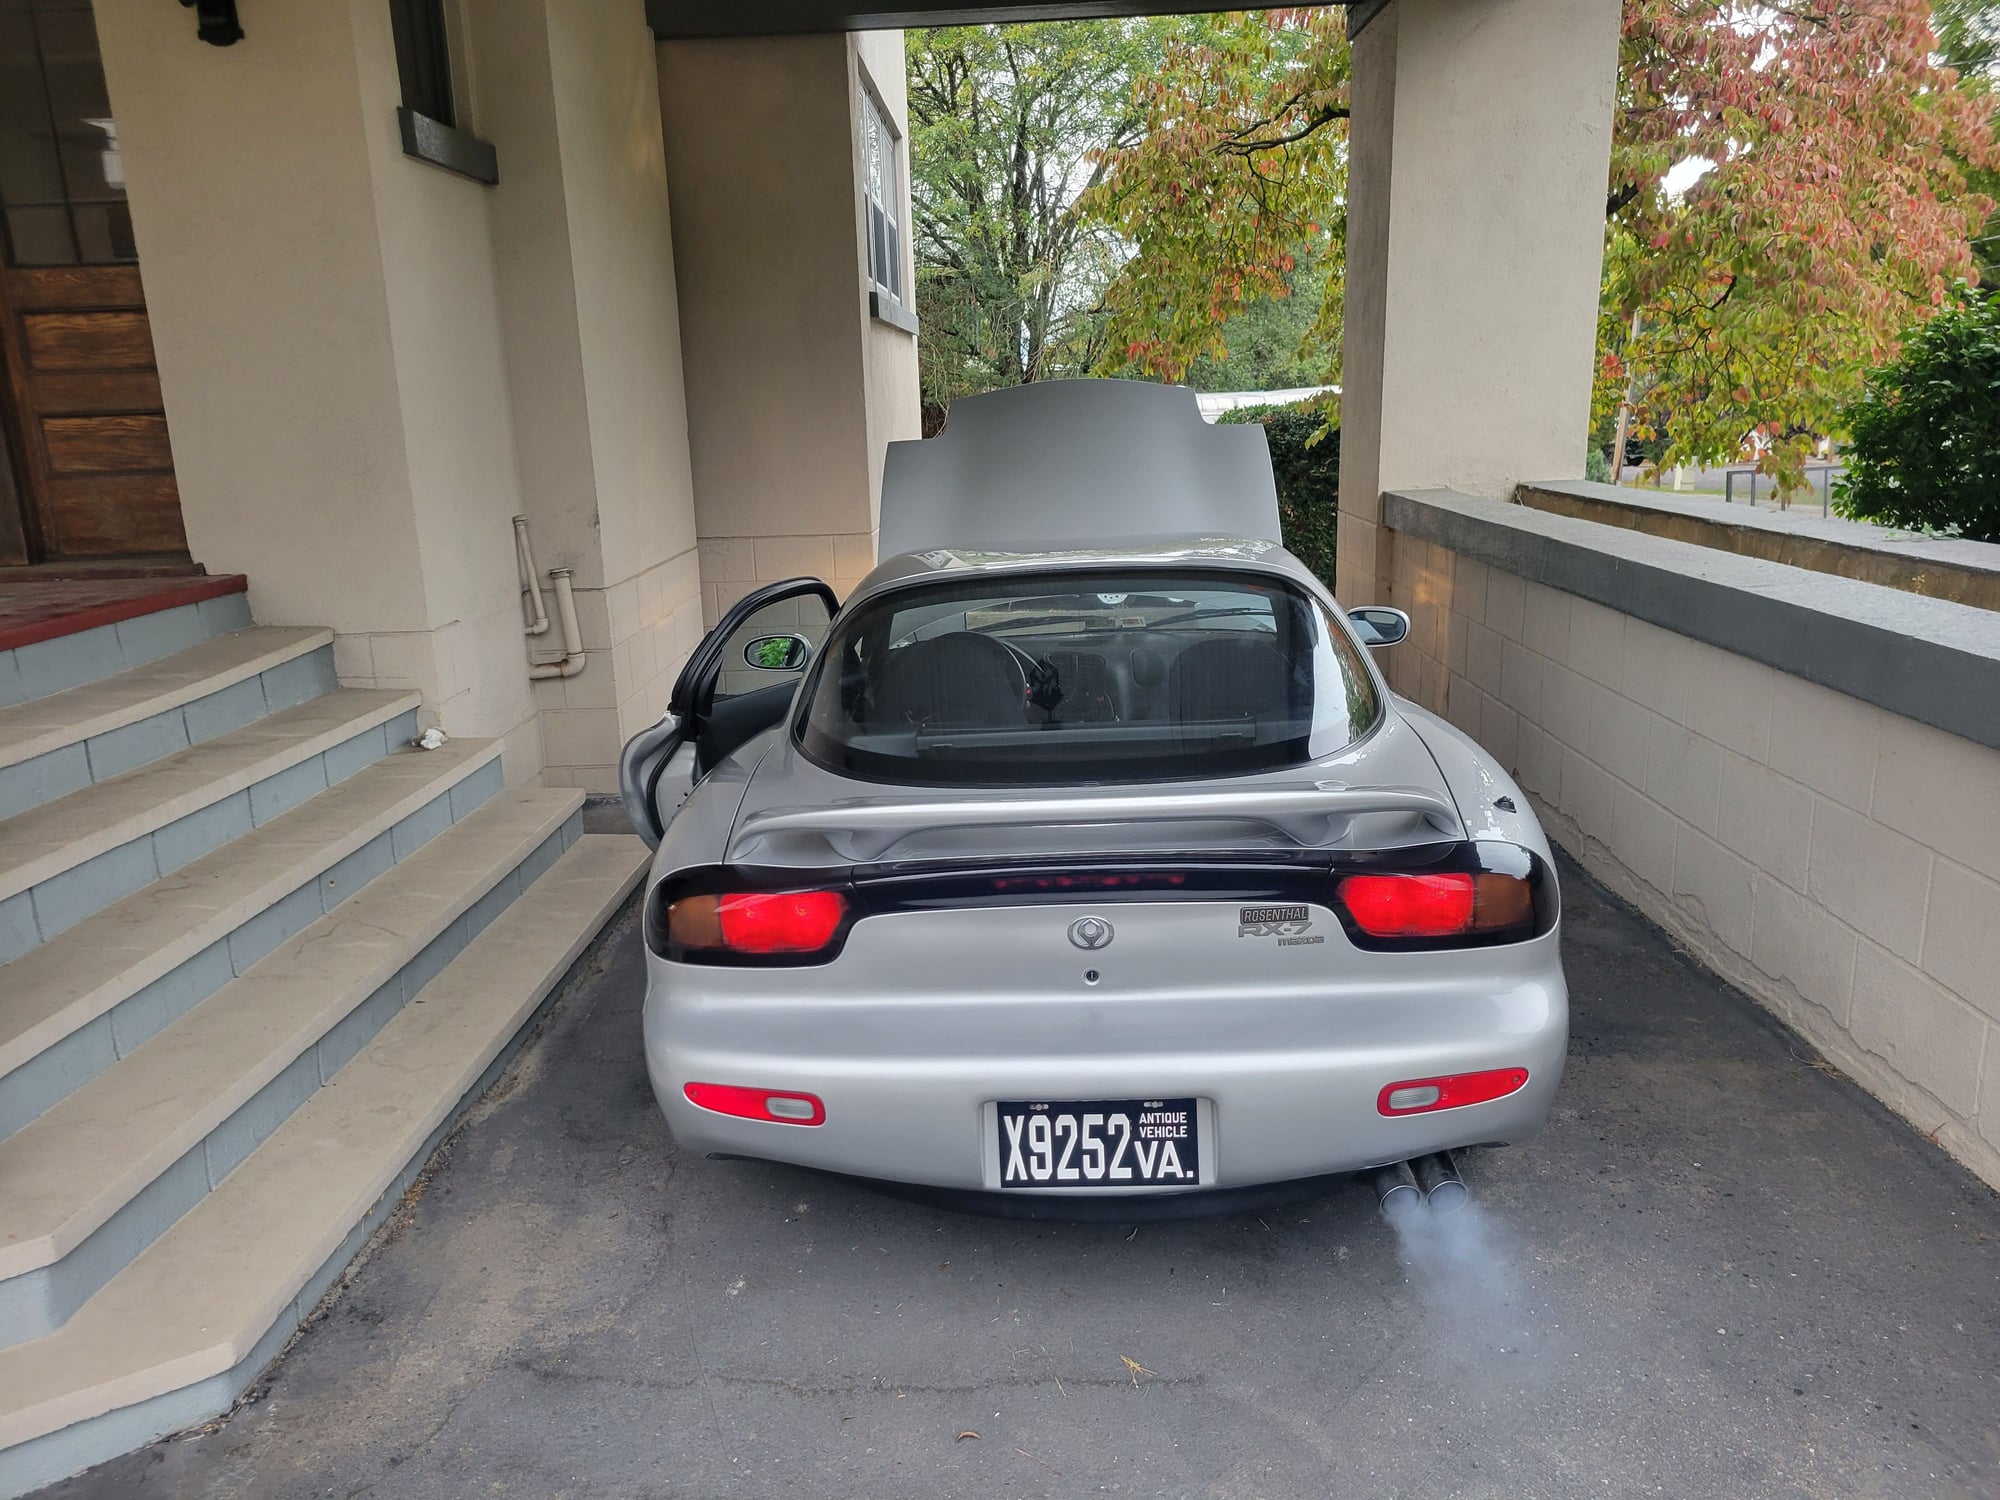 1994 Mazda RX-7 - 1994 Rx7 R2 Extremely low mileage, - Used - VIN JM1FD3339R0300977 - 4,216 Miles - 2 cyl - 2WD - Manual - Coupe - Silver - Harrisonburg, VA 22801, United States